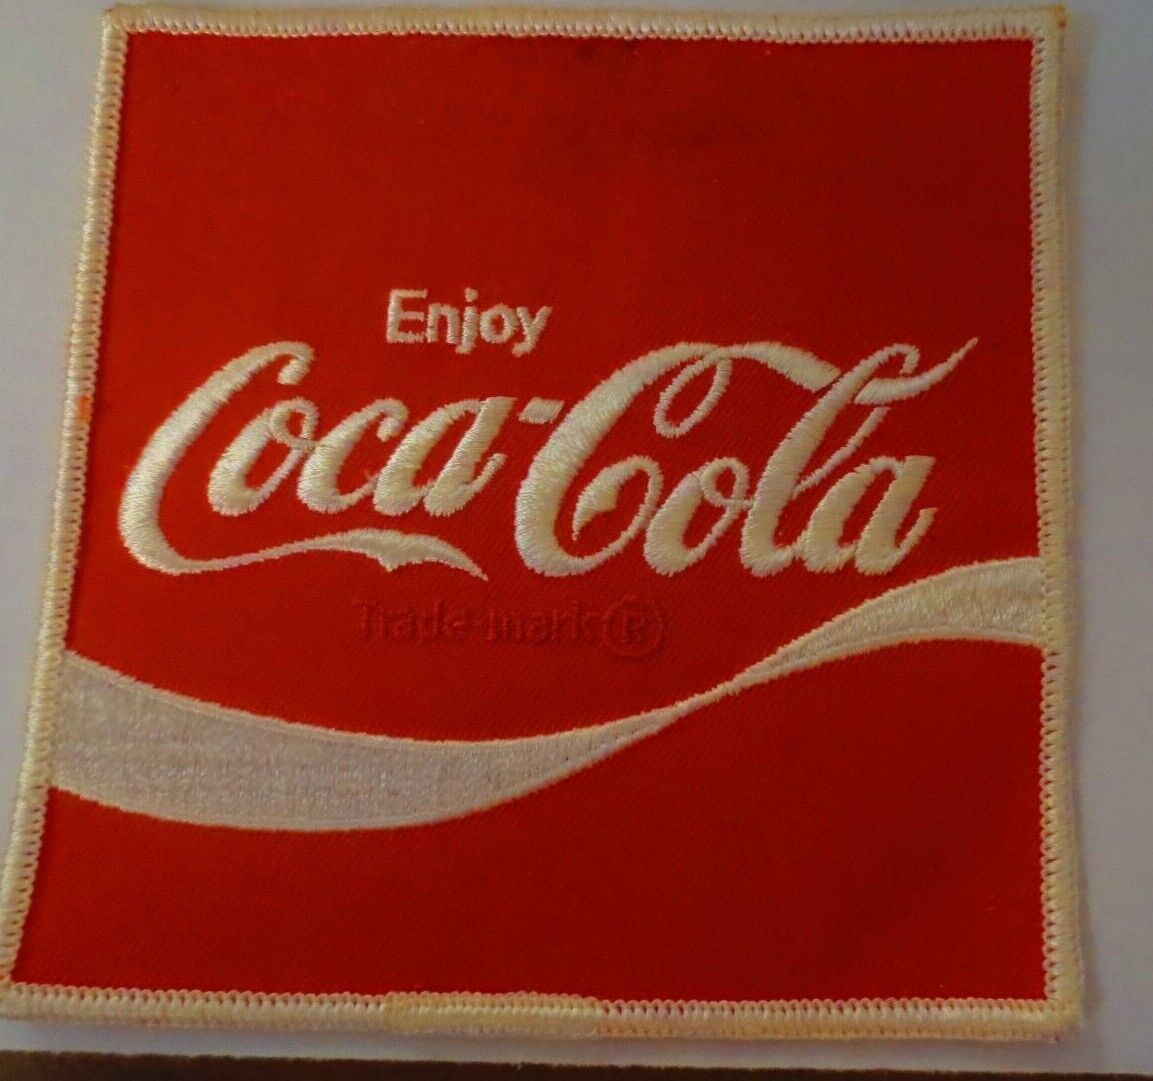 Primary image for Coca Cola   Uniform Patch   Square  2 1/2  inches  new